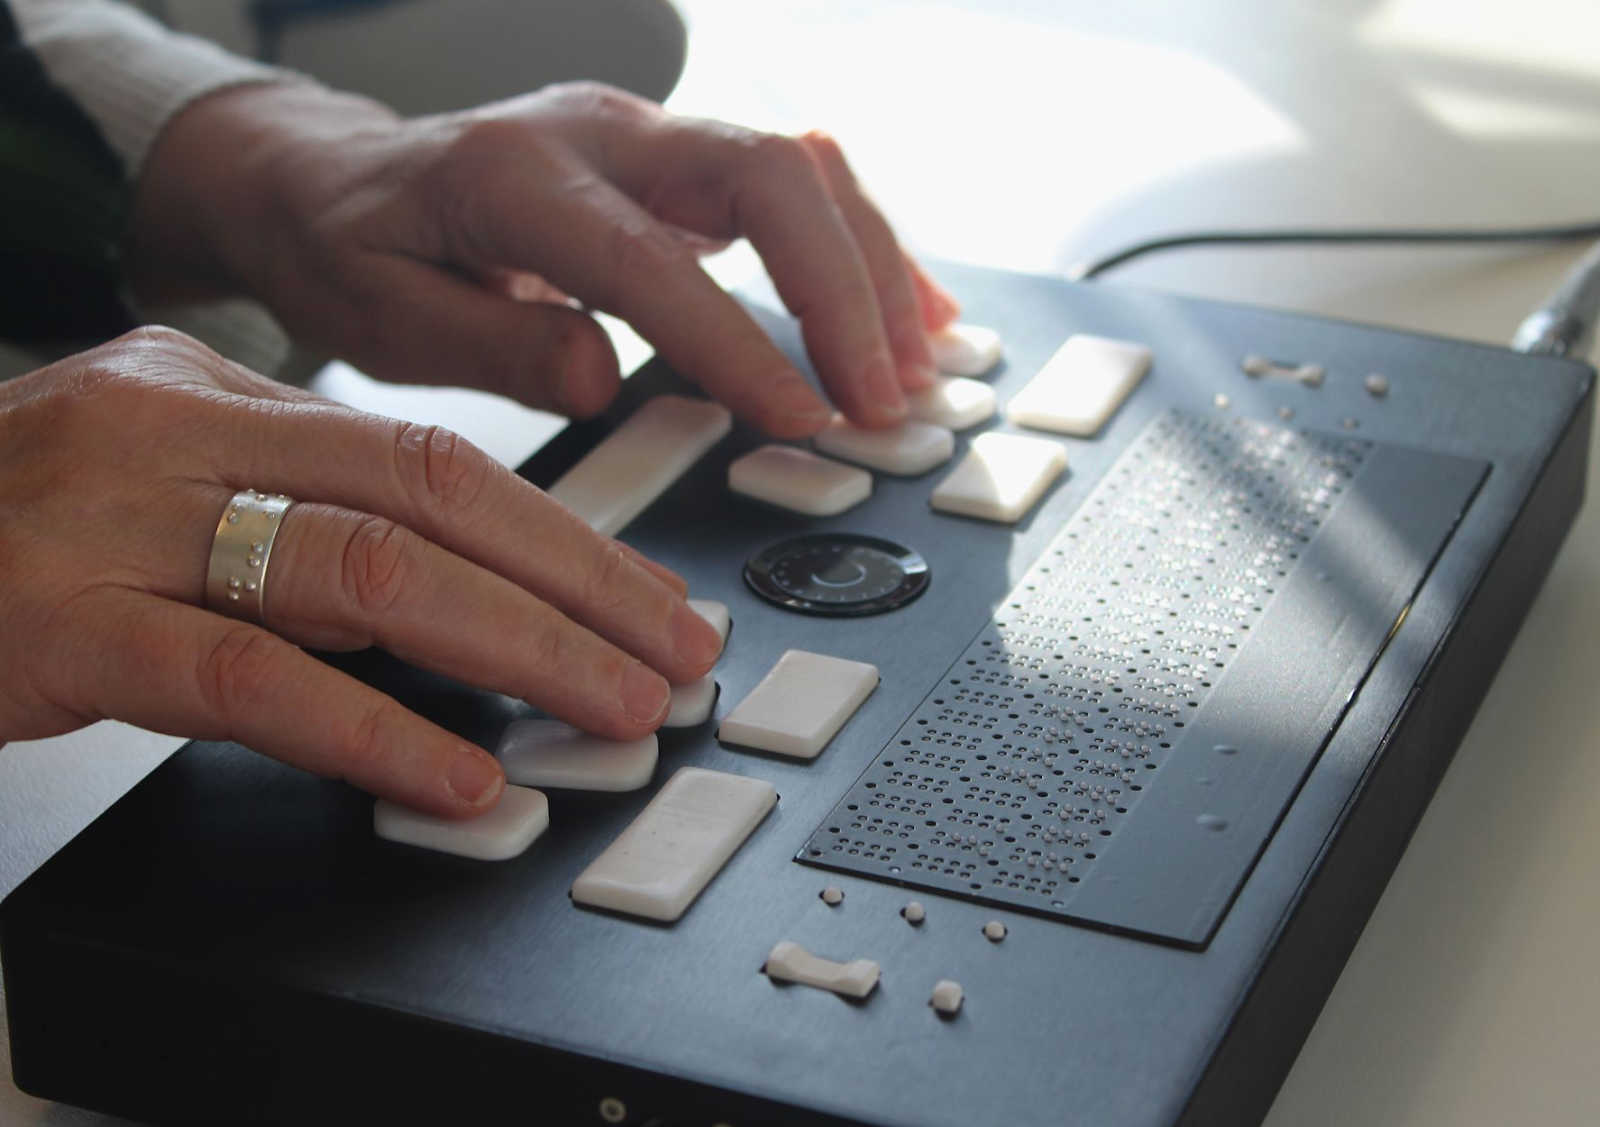 User testing a refreshable braille display